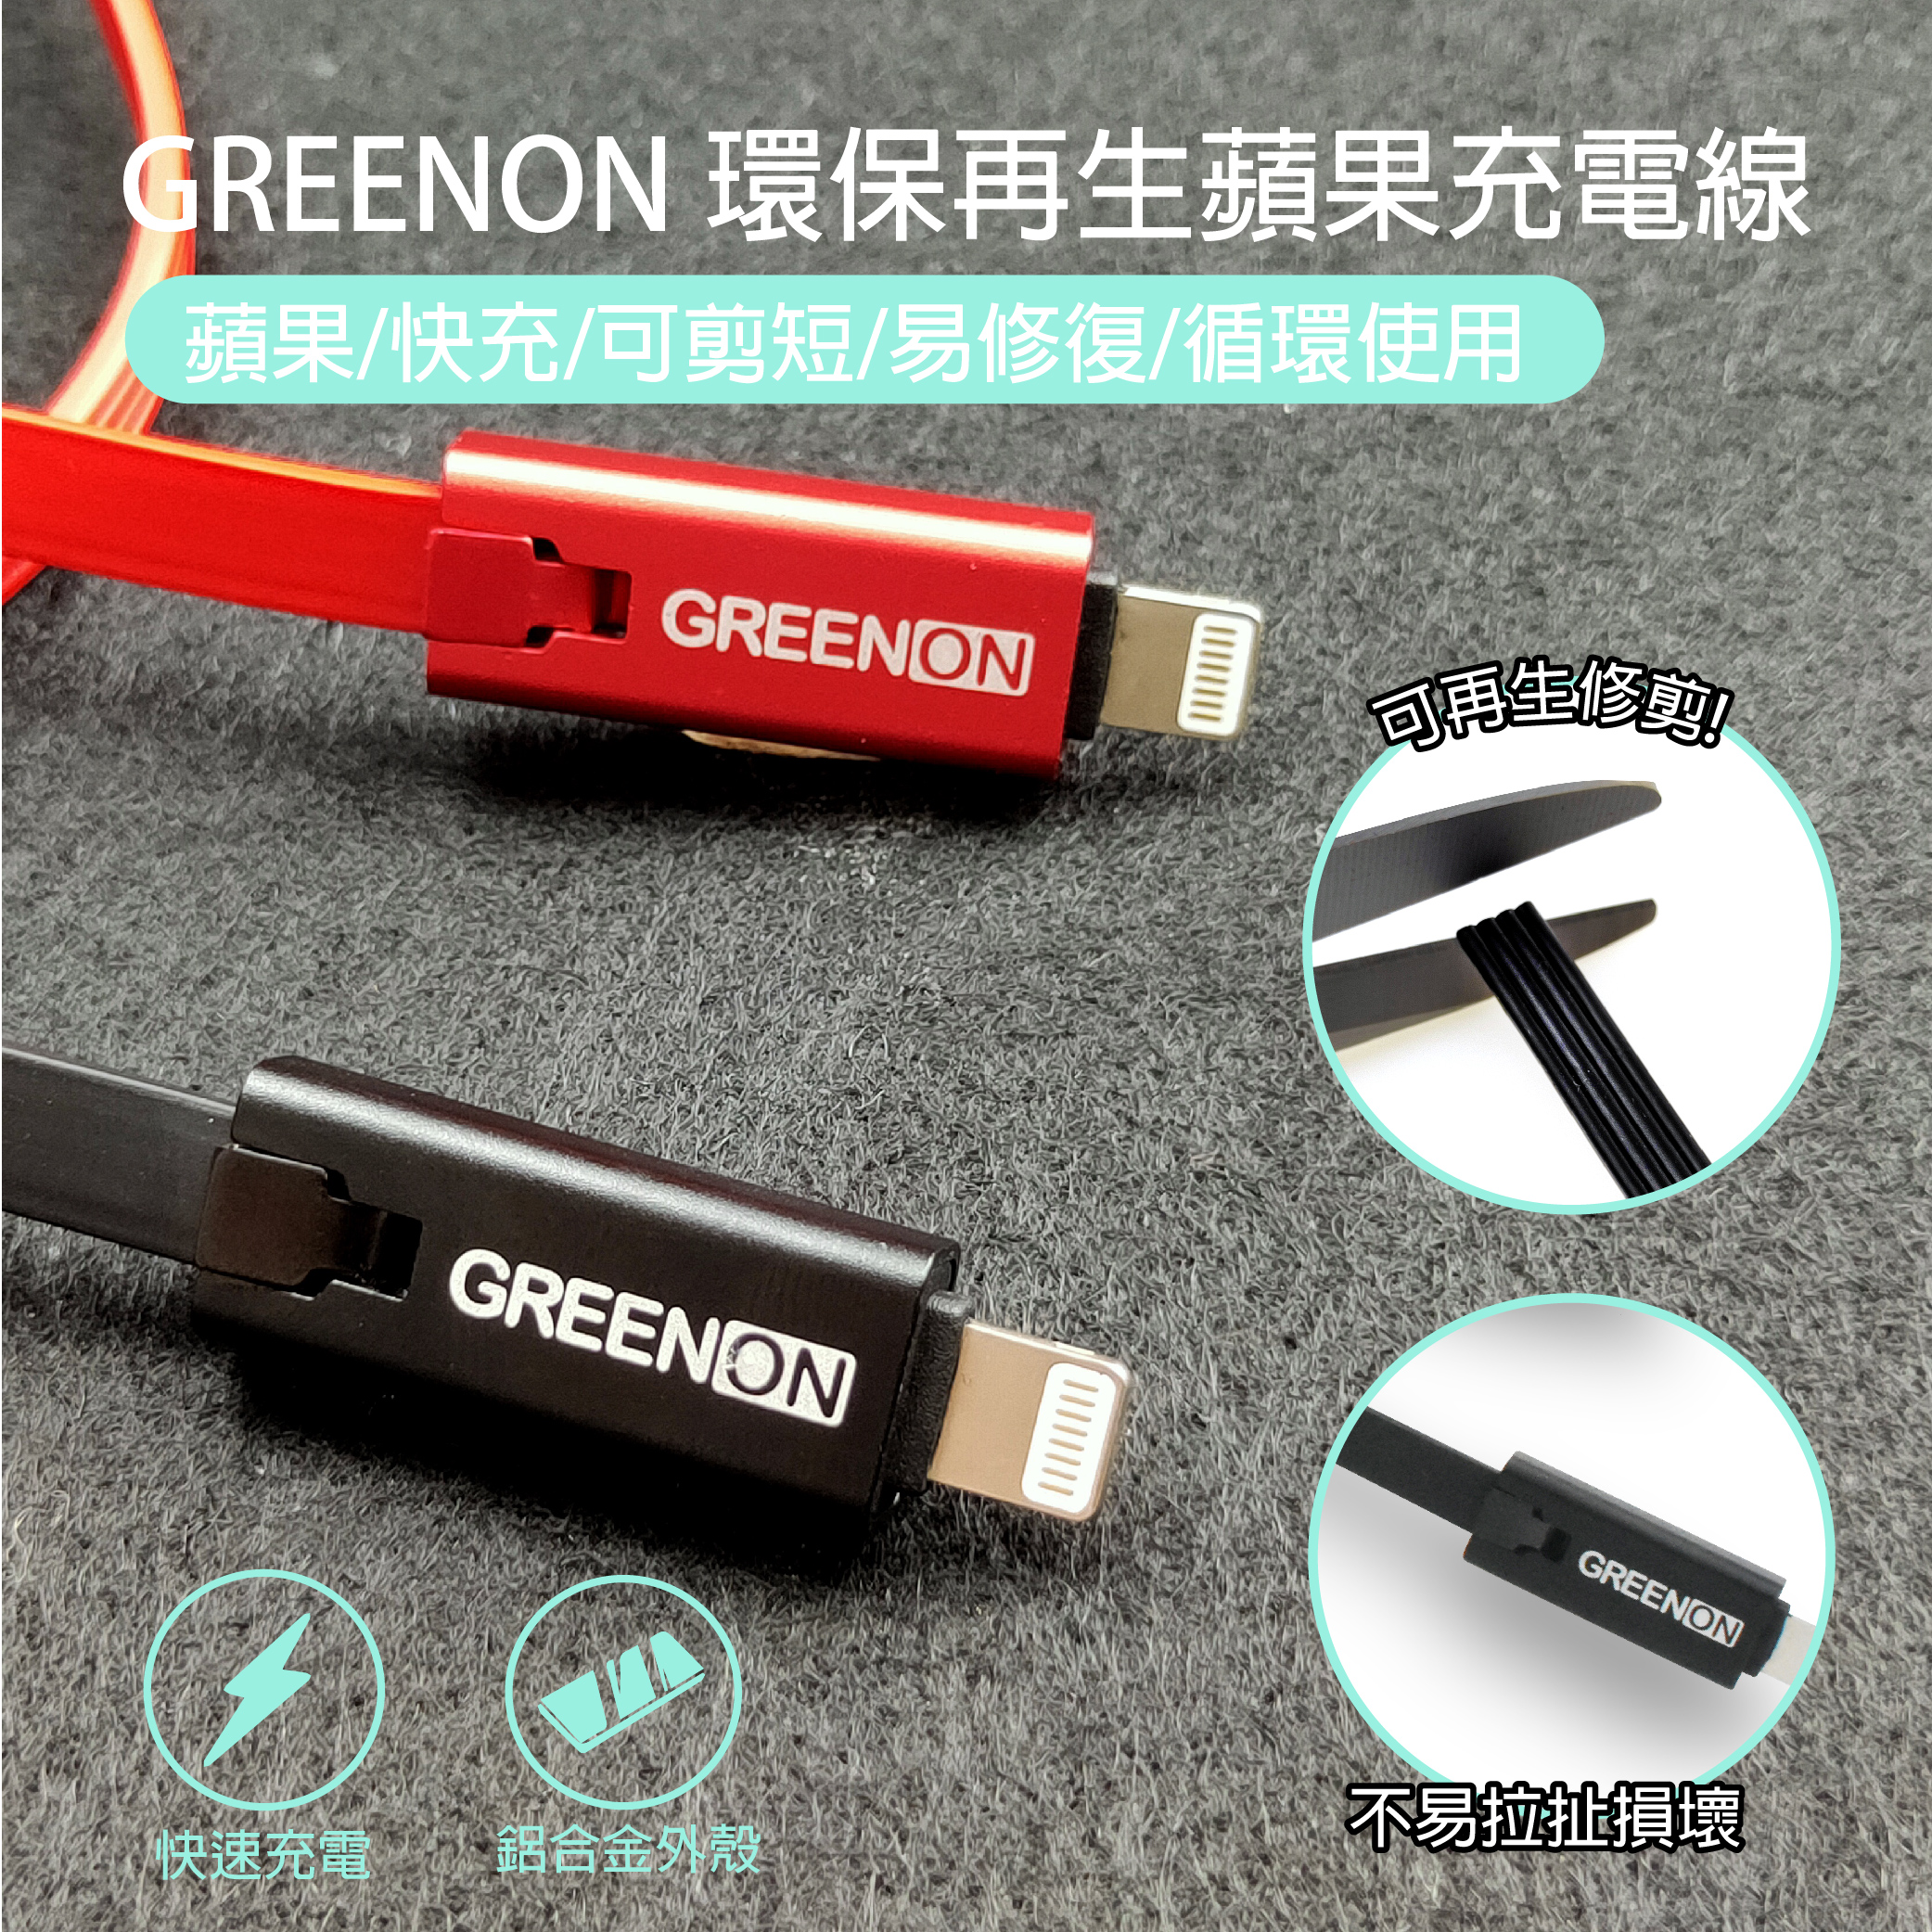 Buy One Get One Free Greenon Eco Friendly Recycled Usb Charging Cable Can Trim Iphone Charging Cable 8pin Shop Greenon Taiwan Phone Accessories Pinkoi